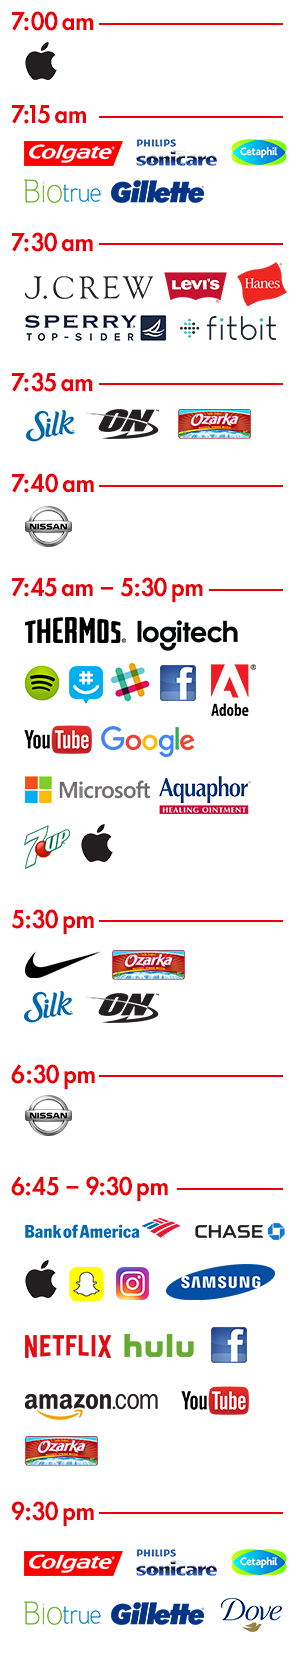 brand timeline showing brands used at different times of the day